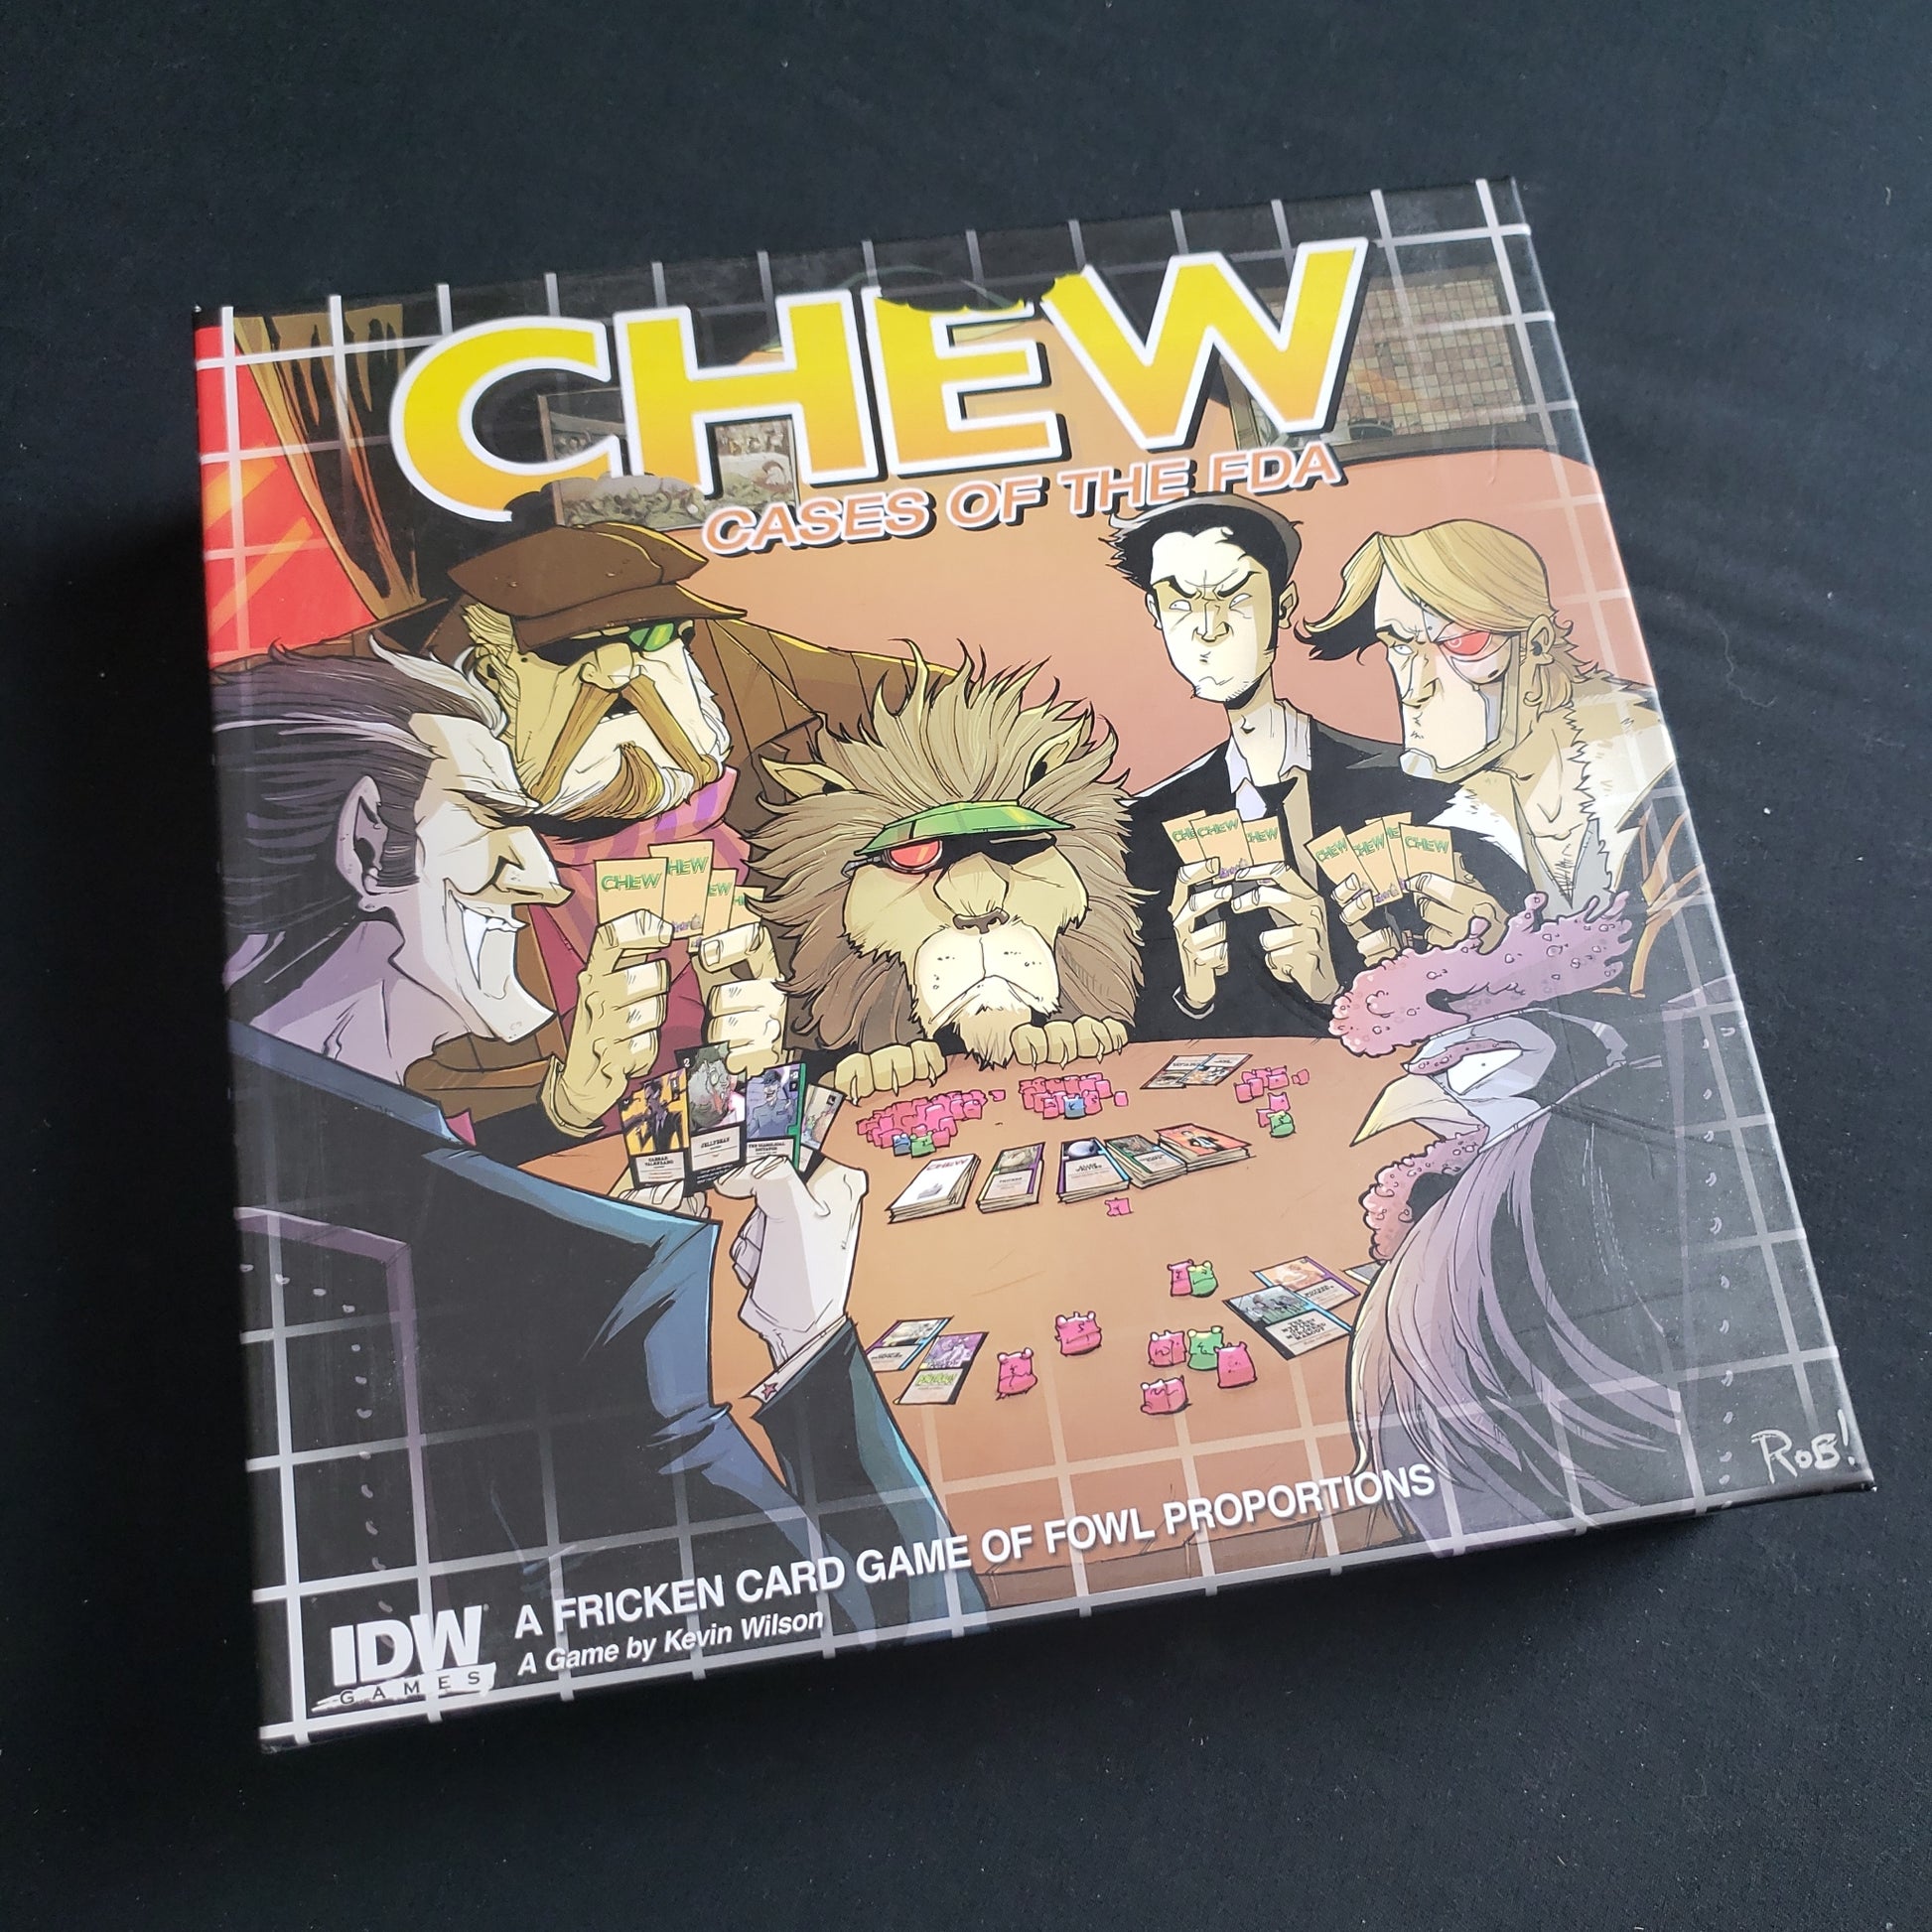 Image shows the front cover of the box of the CHEW: Cases of the FDA card game